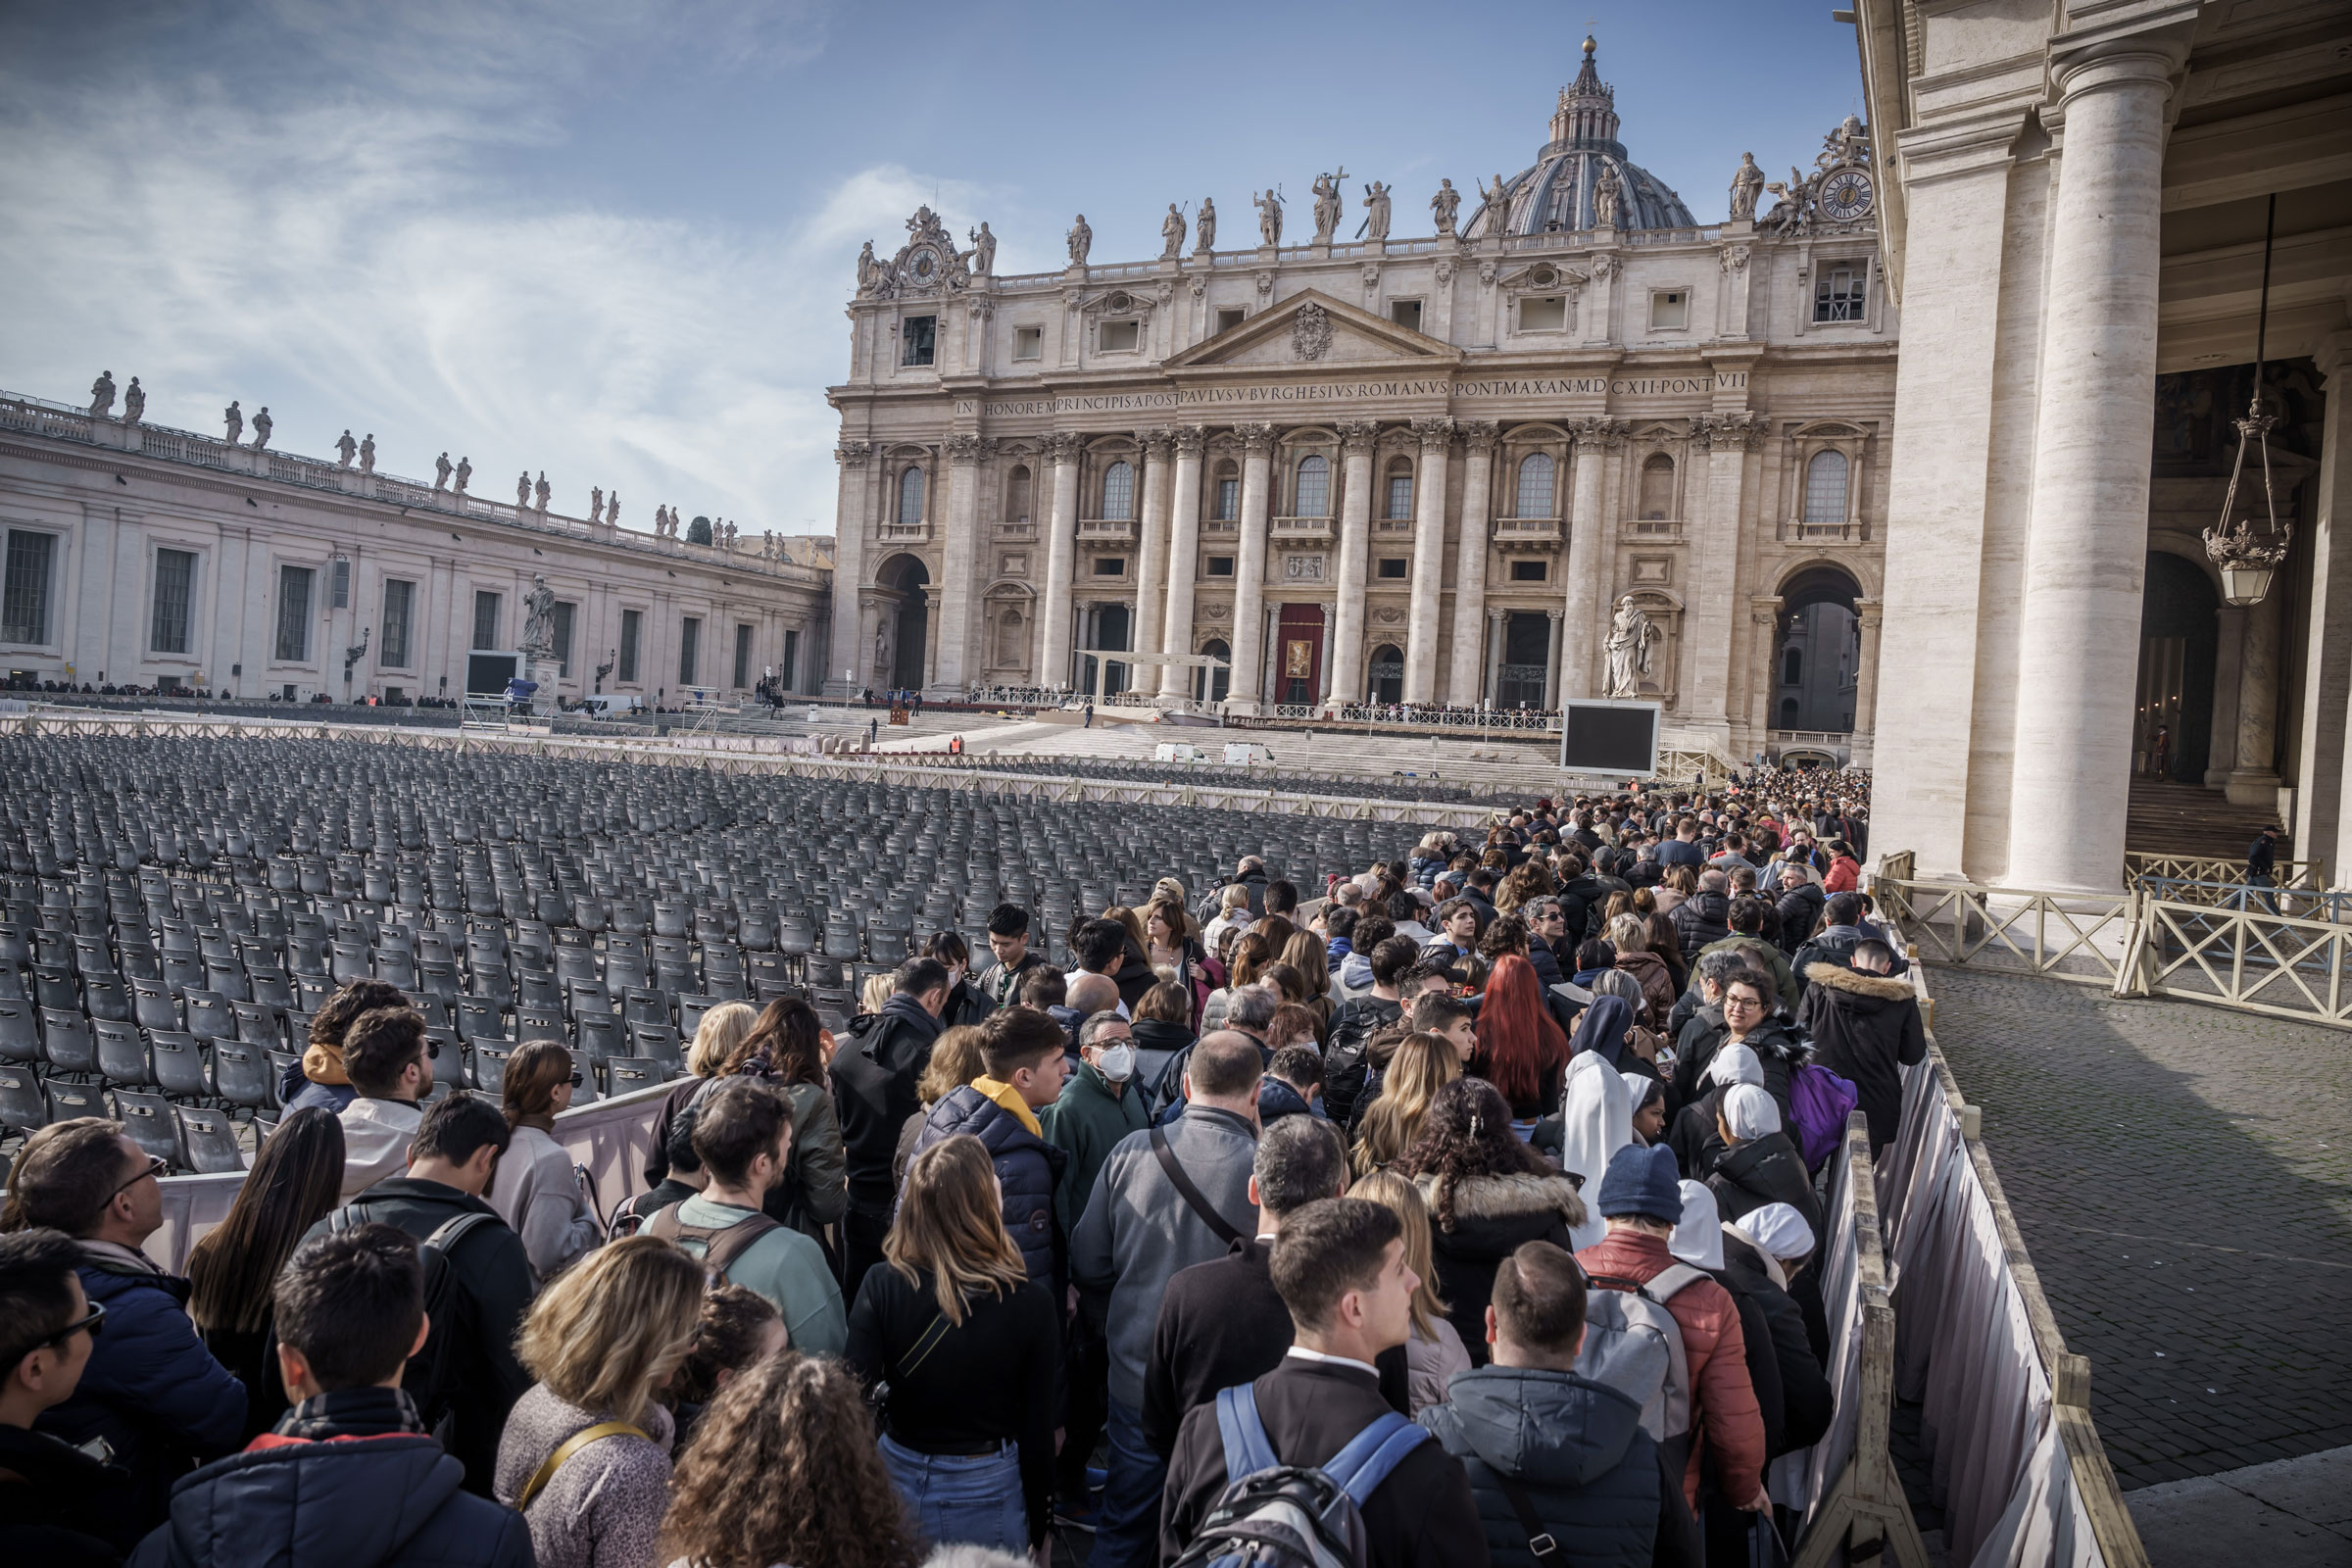 Faithful stand in St. Peter’s Square to bid farewell to the body of the late Pope Emeritus Benedict XVI, who is laid out in public in St. Peter’s Basilica, on Jan. 4, 2023. (Michael Kappeler—dpa/picture alliance/Getty Images)